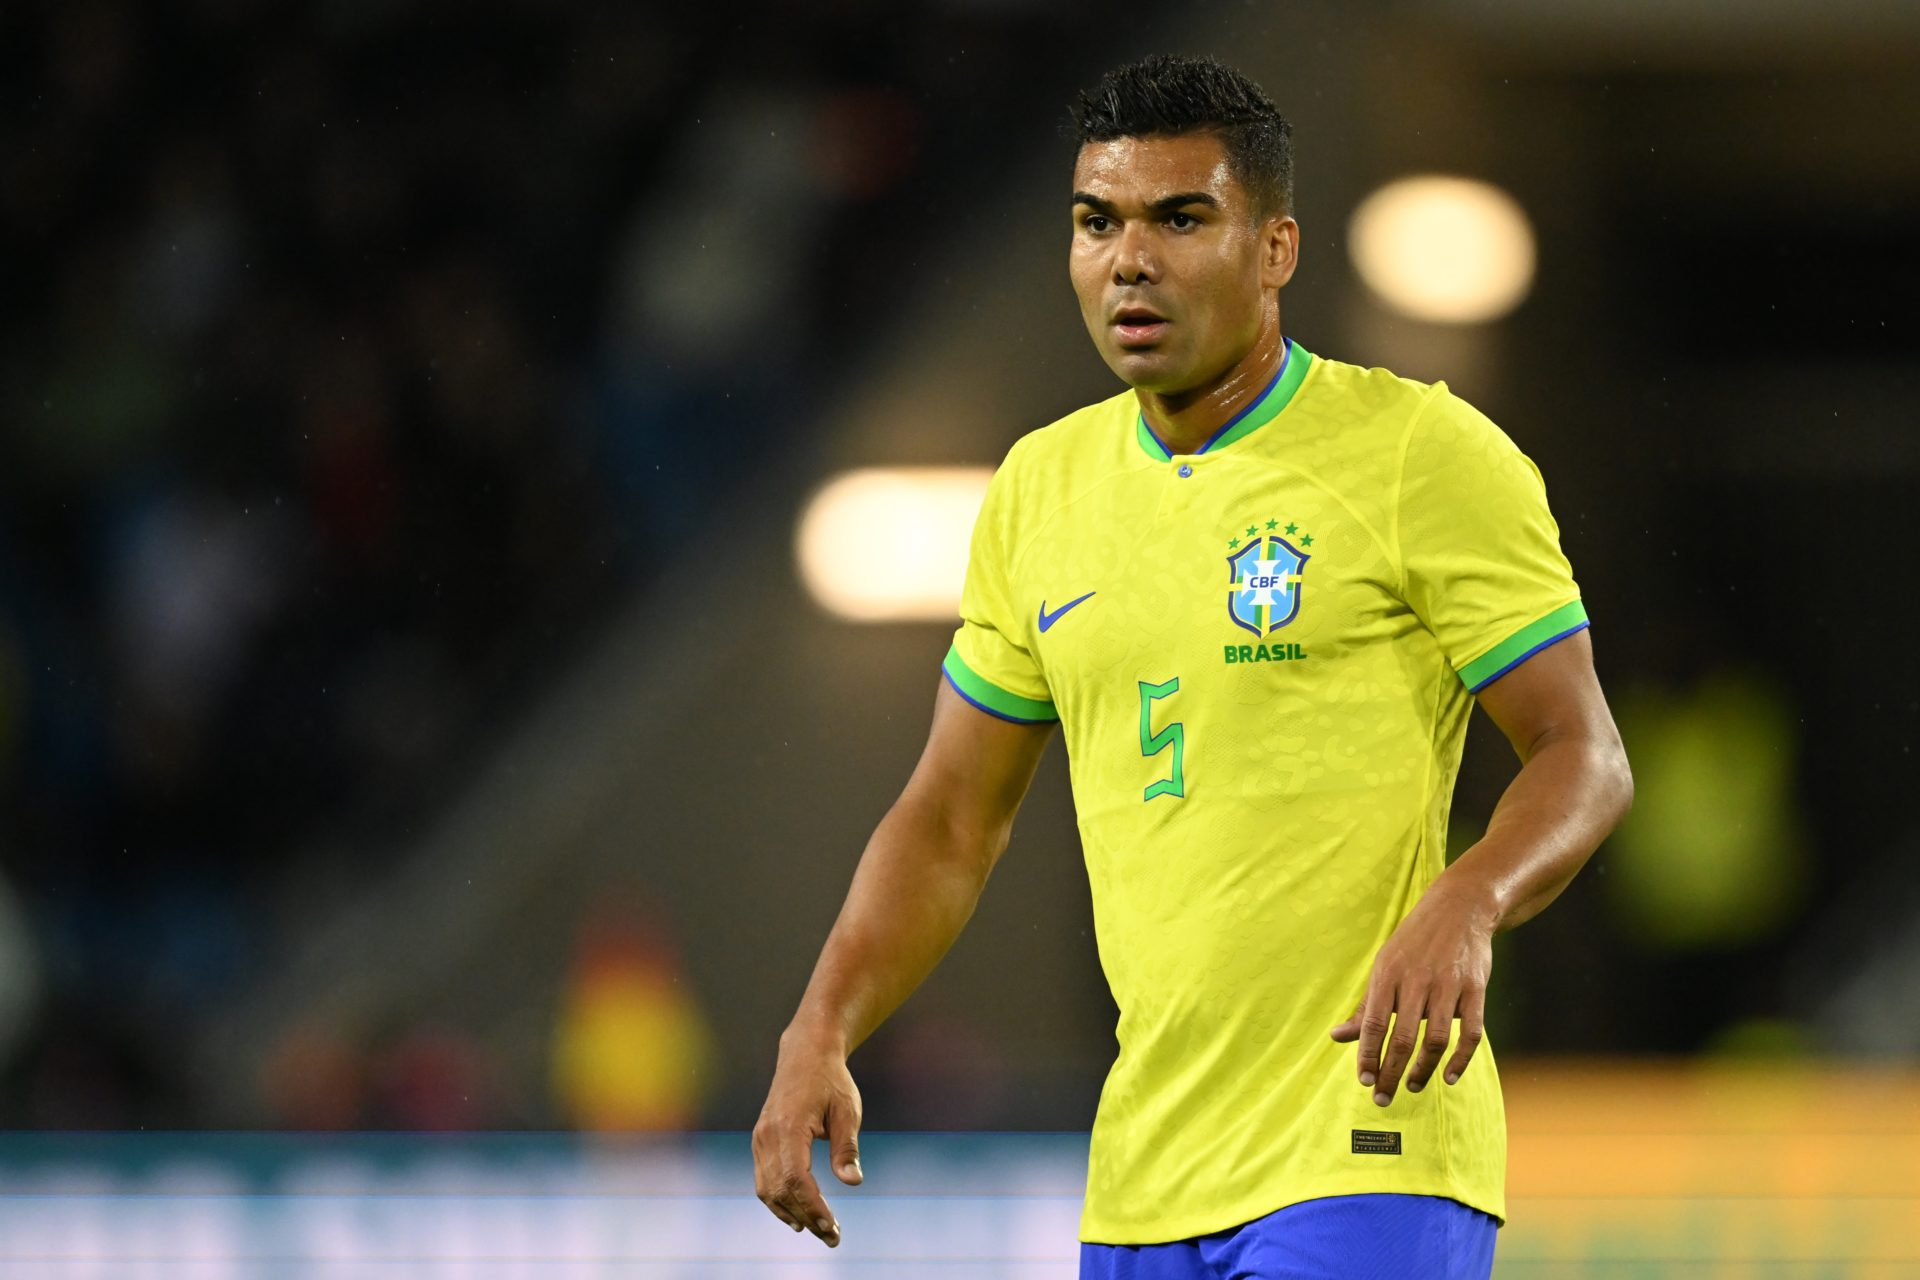 Casemiro provides 40-yard assist for Brazil to show his passing range